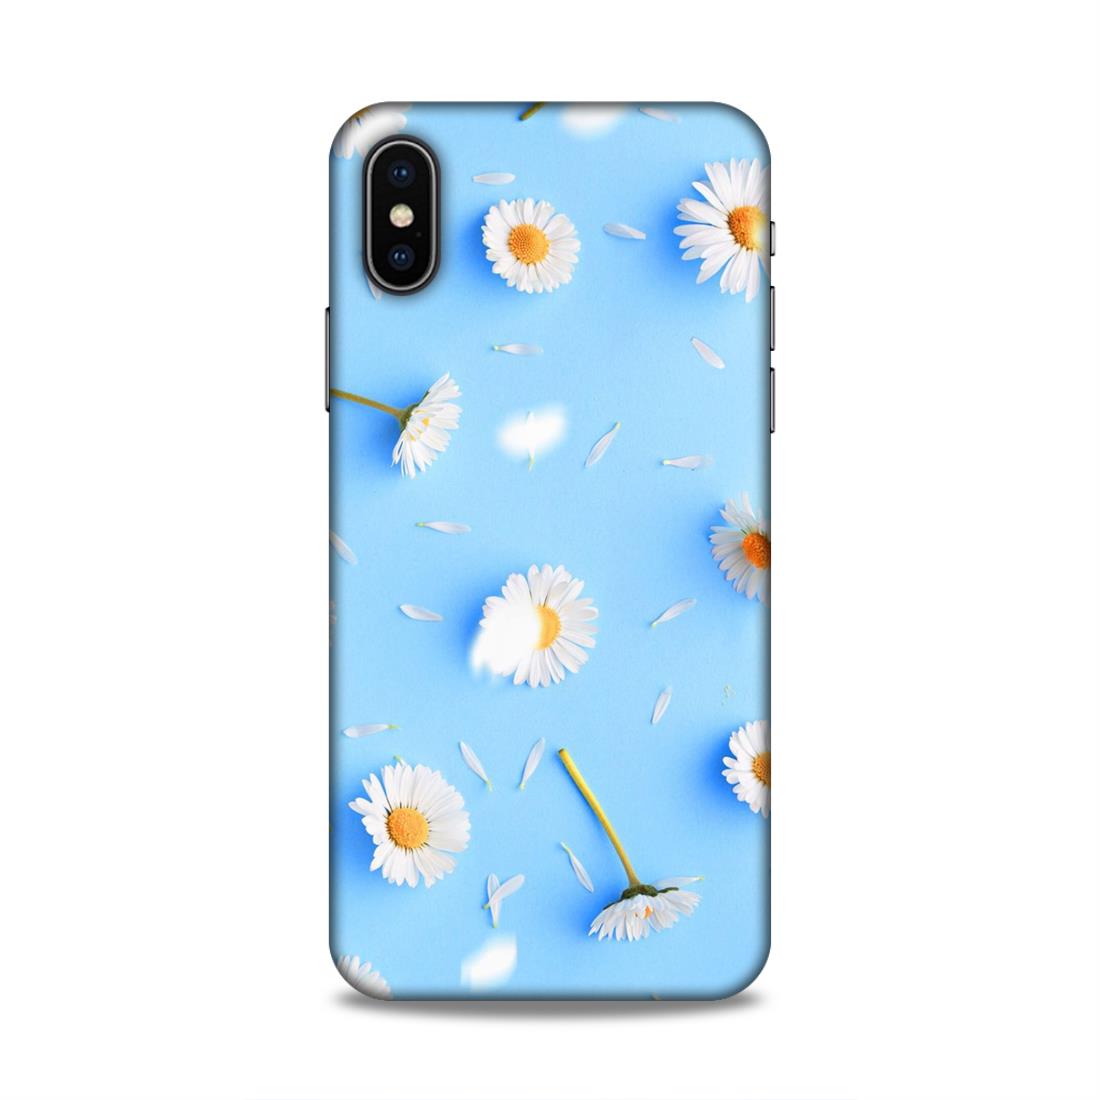 Floral In Sky Blue Hard Back Case For Apple iPhone X/XS